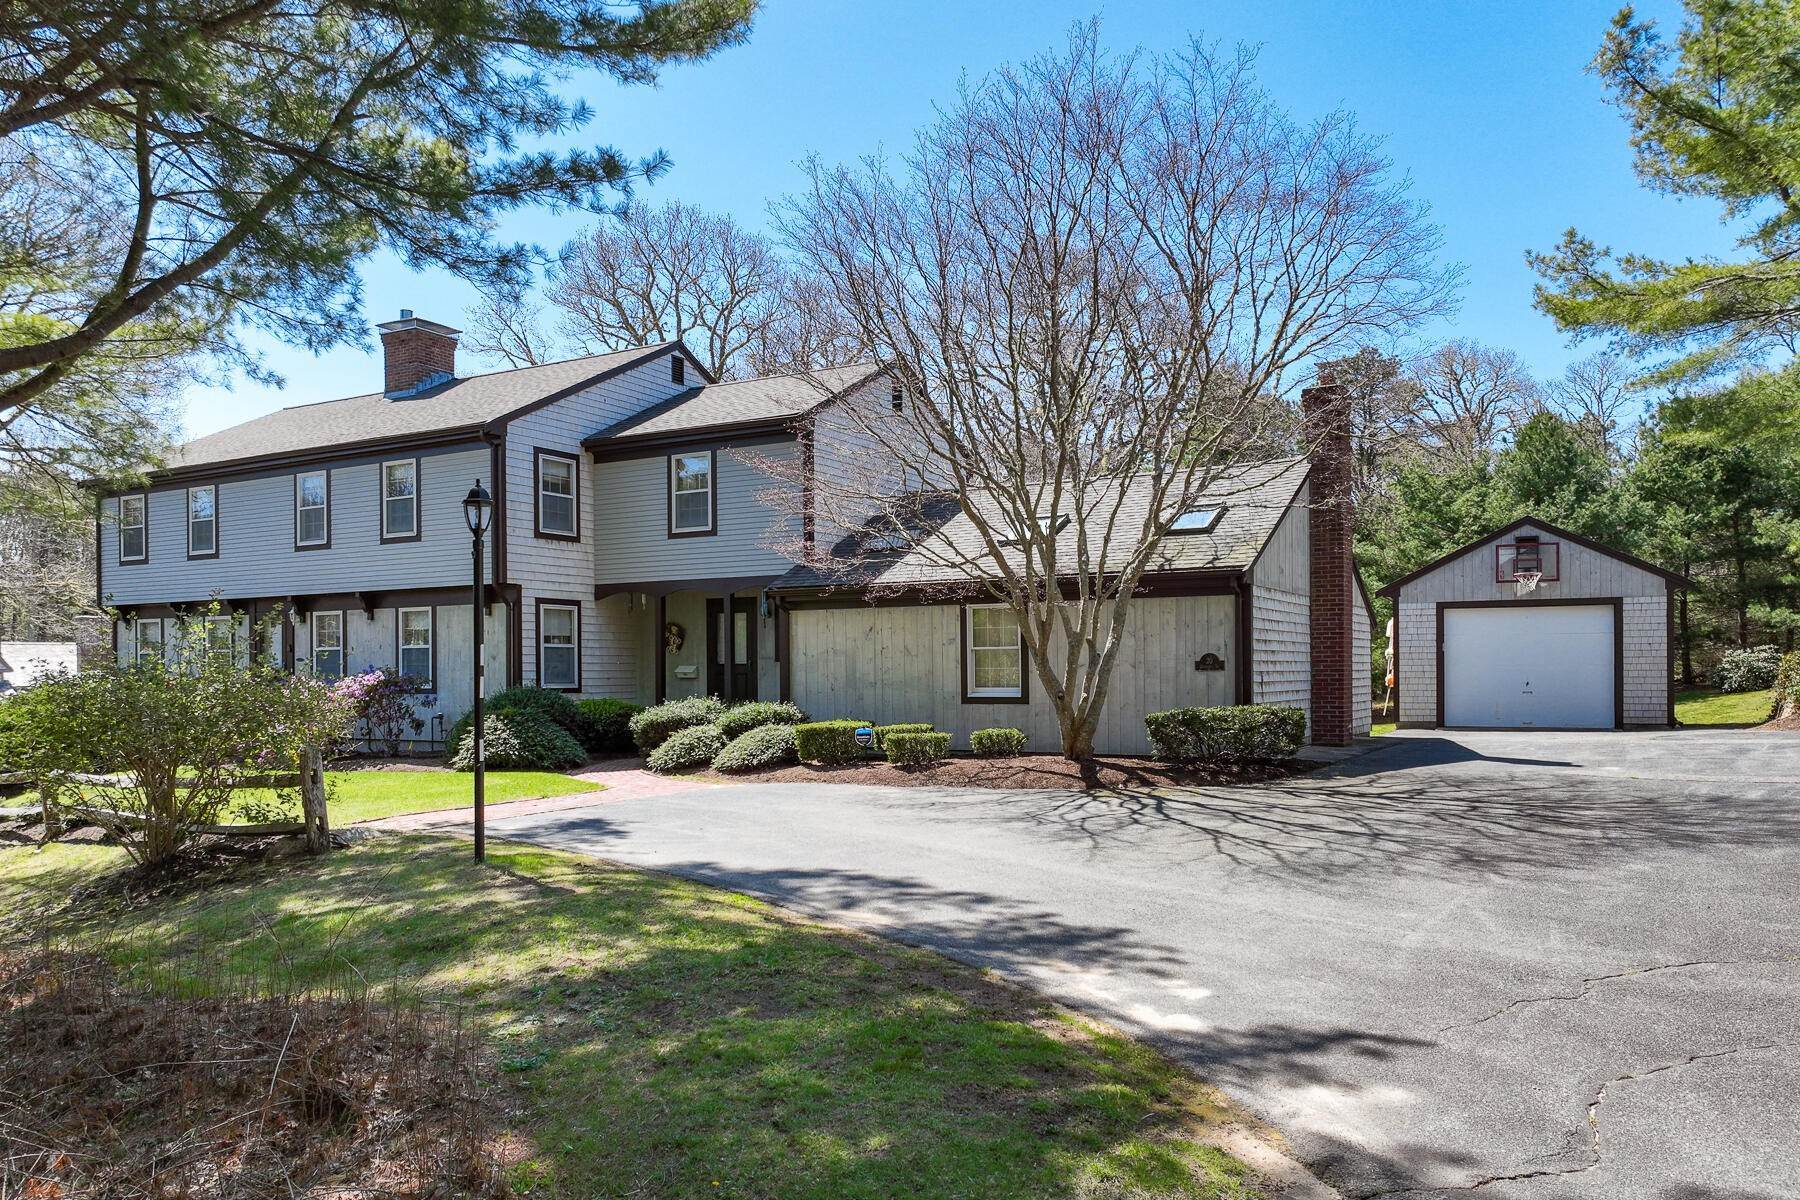 Single Family Homes for Sale at 20 Stone Wall Lane Falmouth, Massachusetts 02540 United States